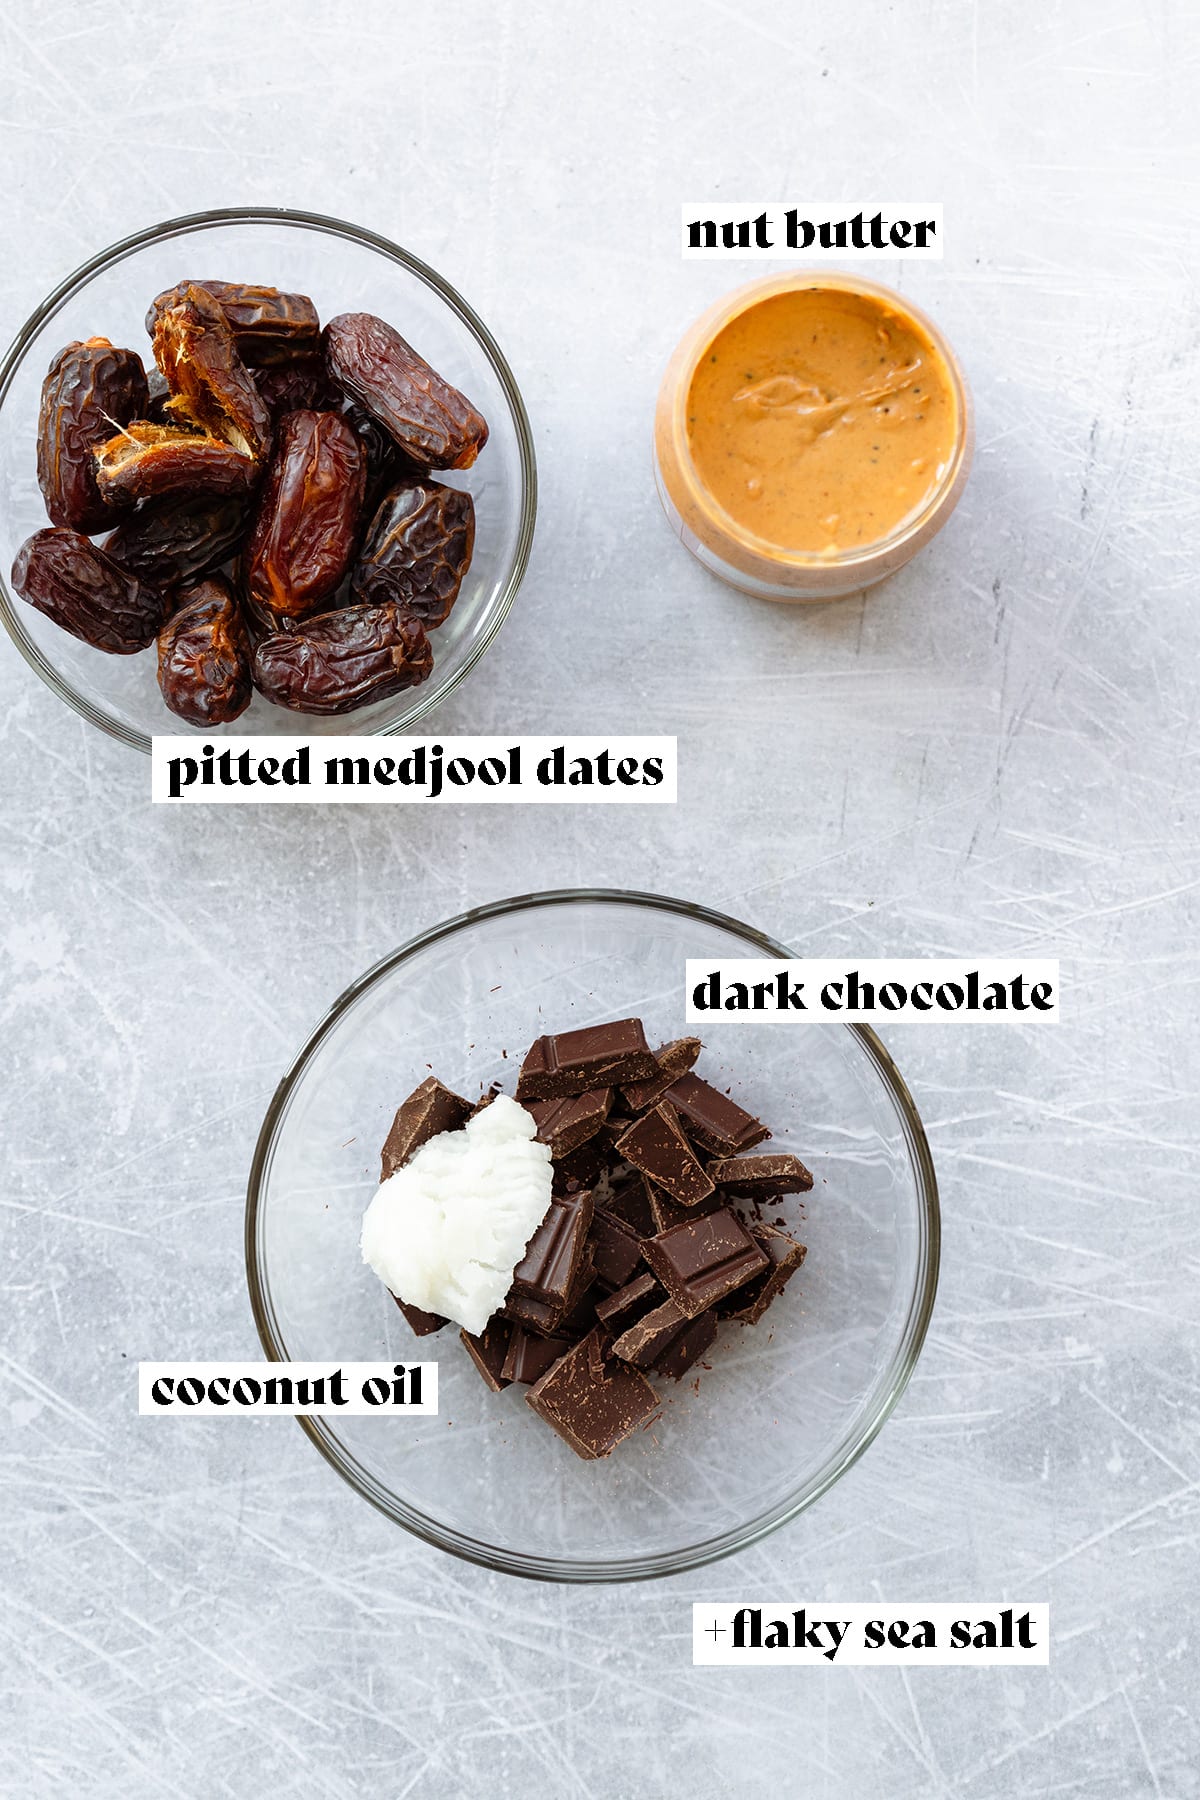 Dates, chocolate, coconut oil, and peanut butter laid out on a scratched metal surface.